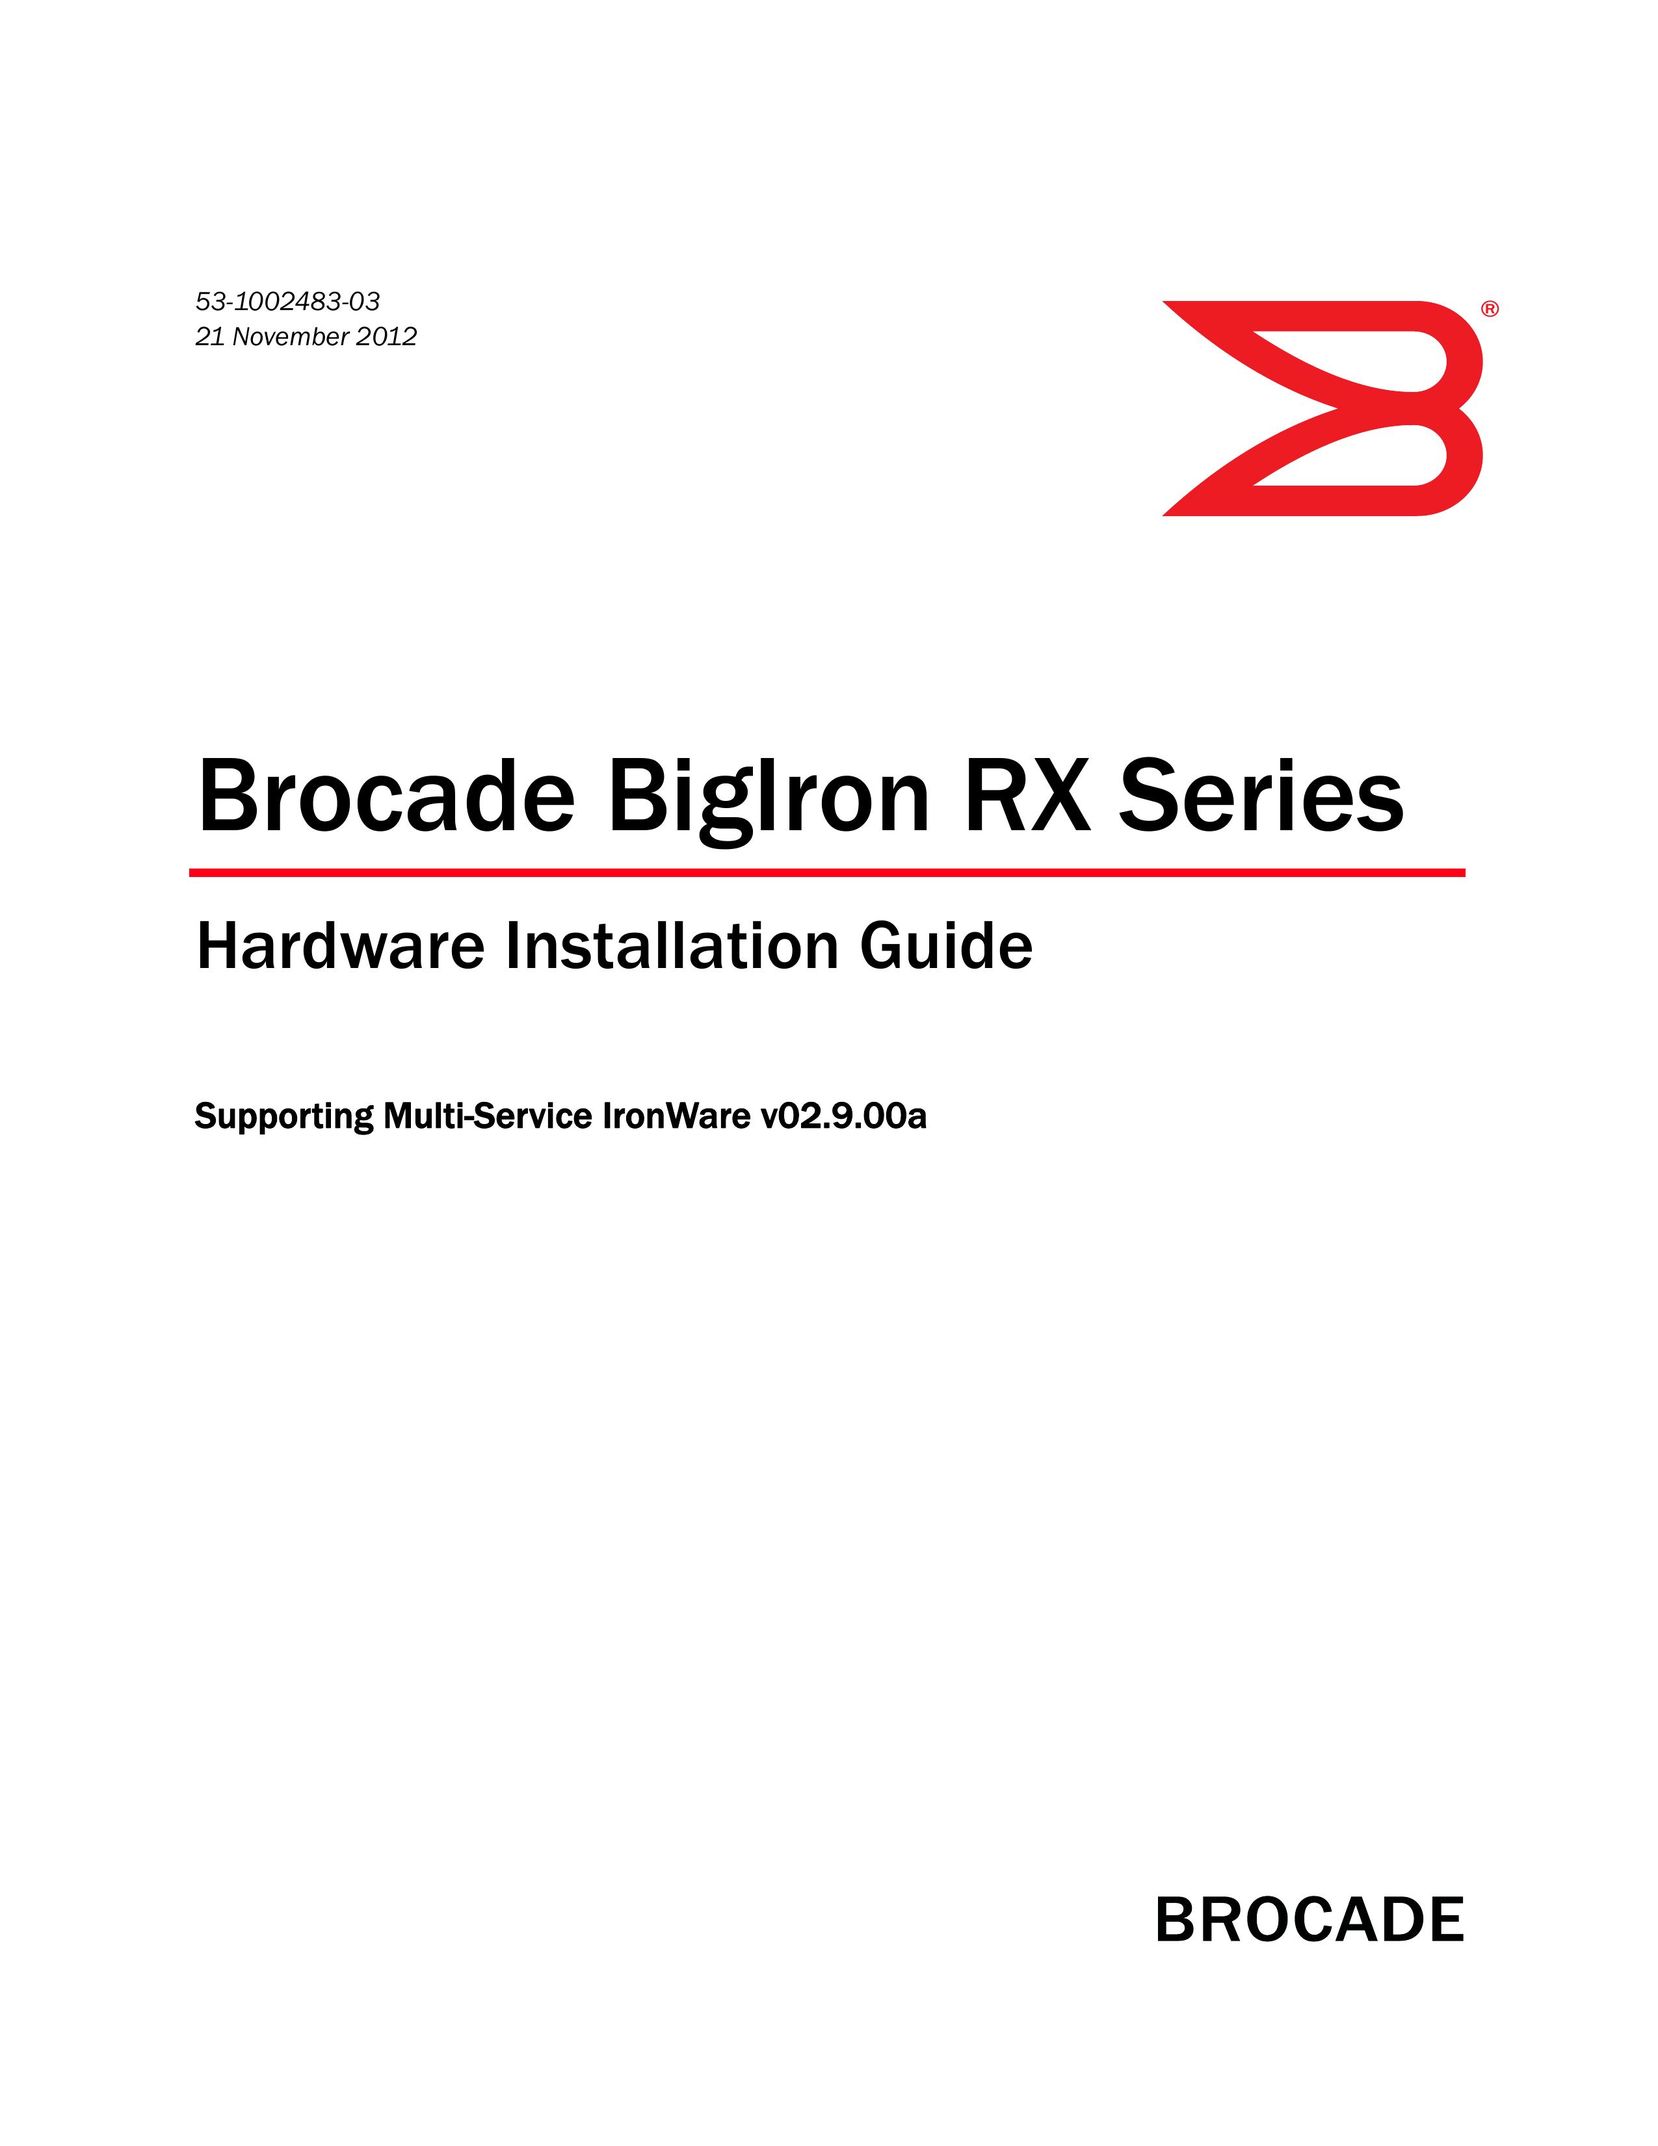 Brocade Communications Systems S3-1002483-03 Home Theater Server User Manual